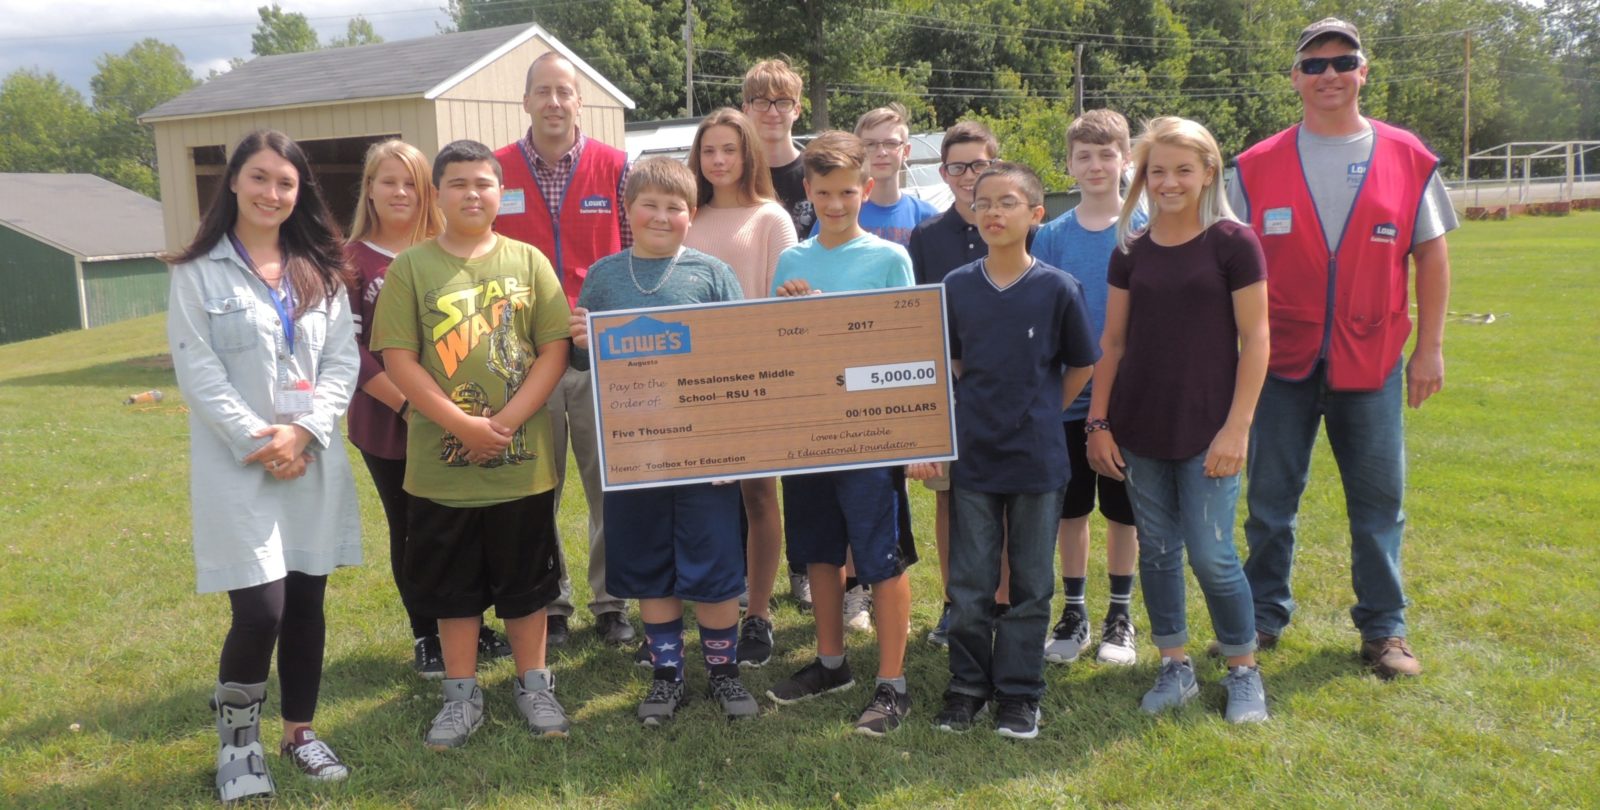 Lowe’s Toolbox for Education Grant awarded to MMS Messalonskee Middle